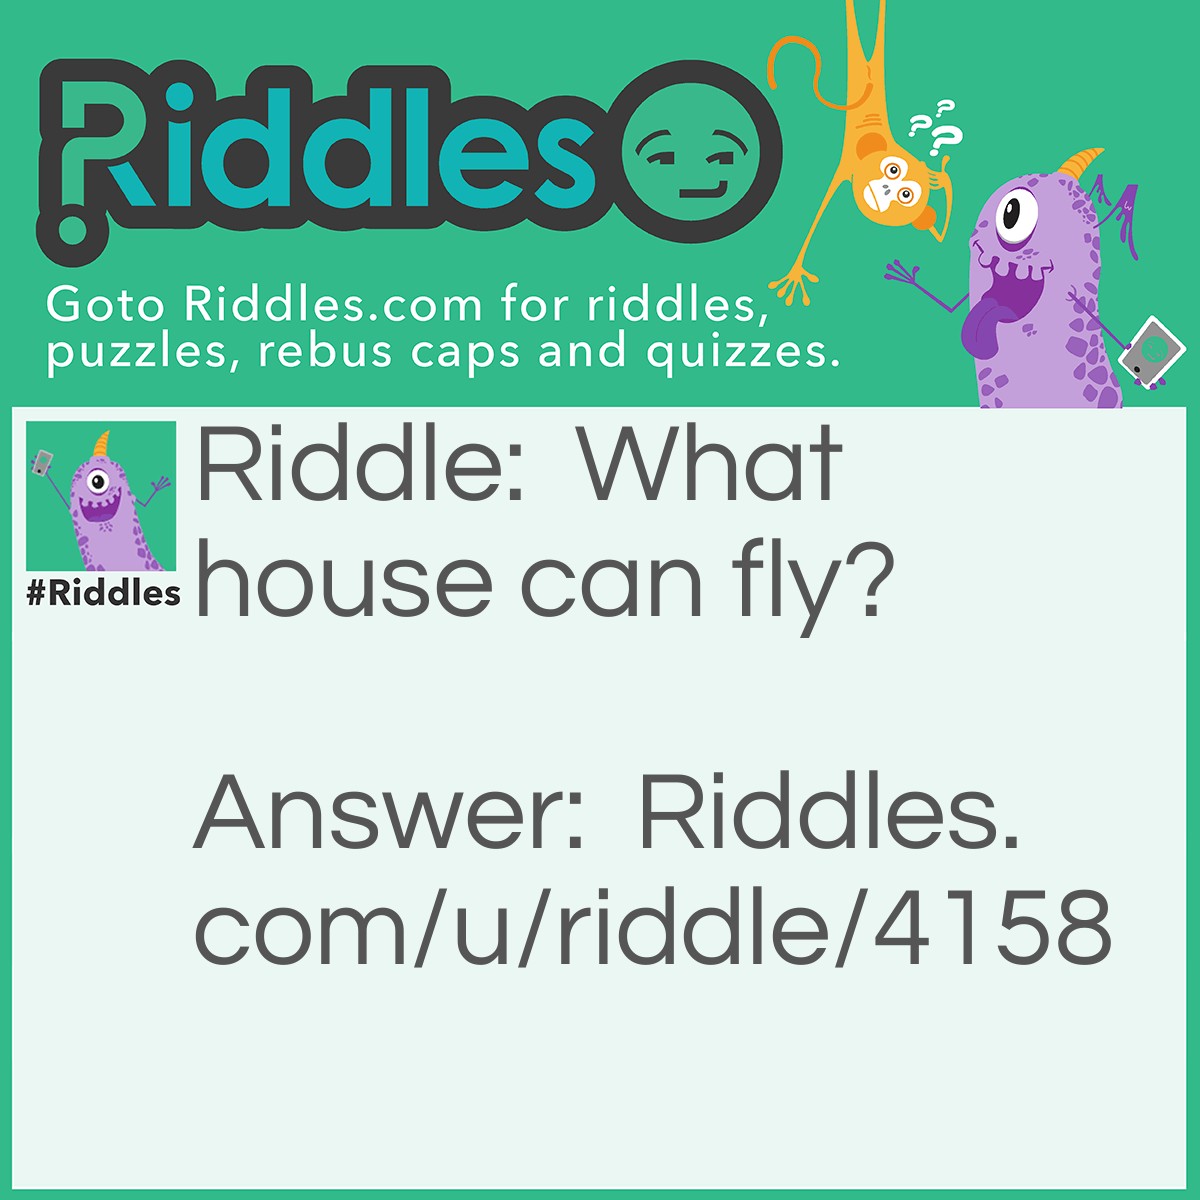 Riddle: What house can fly? Answer: Housefly.